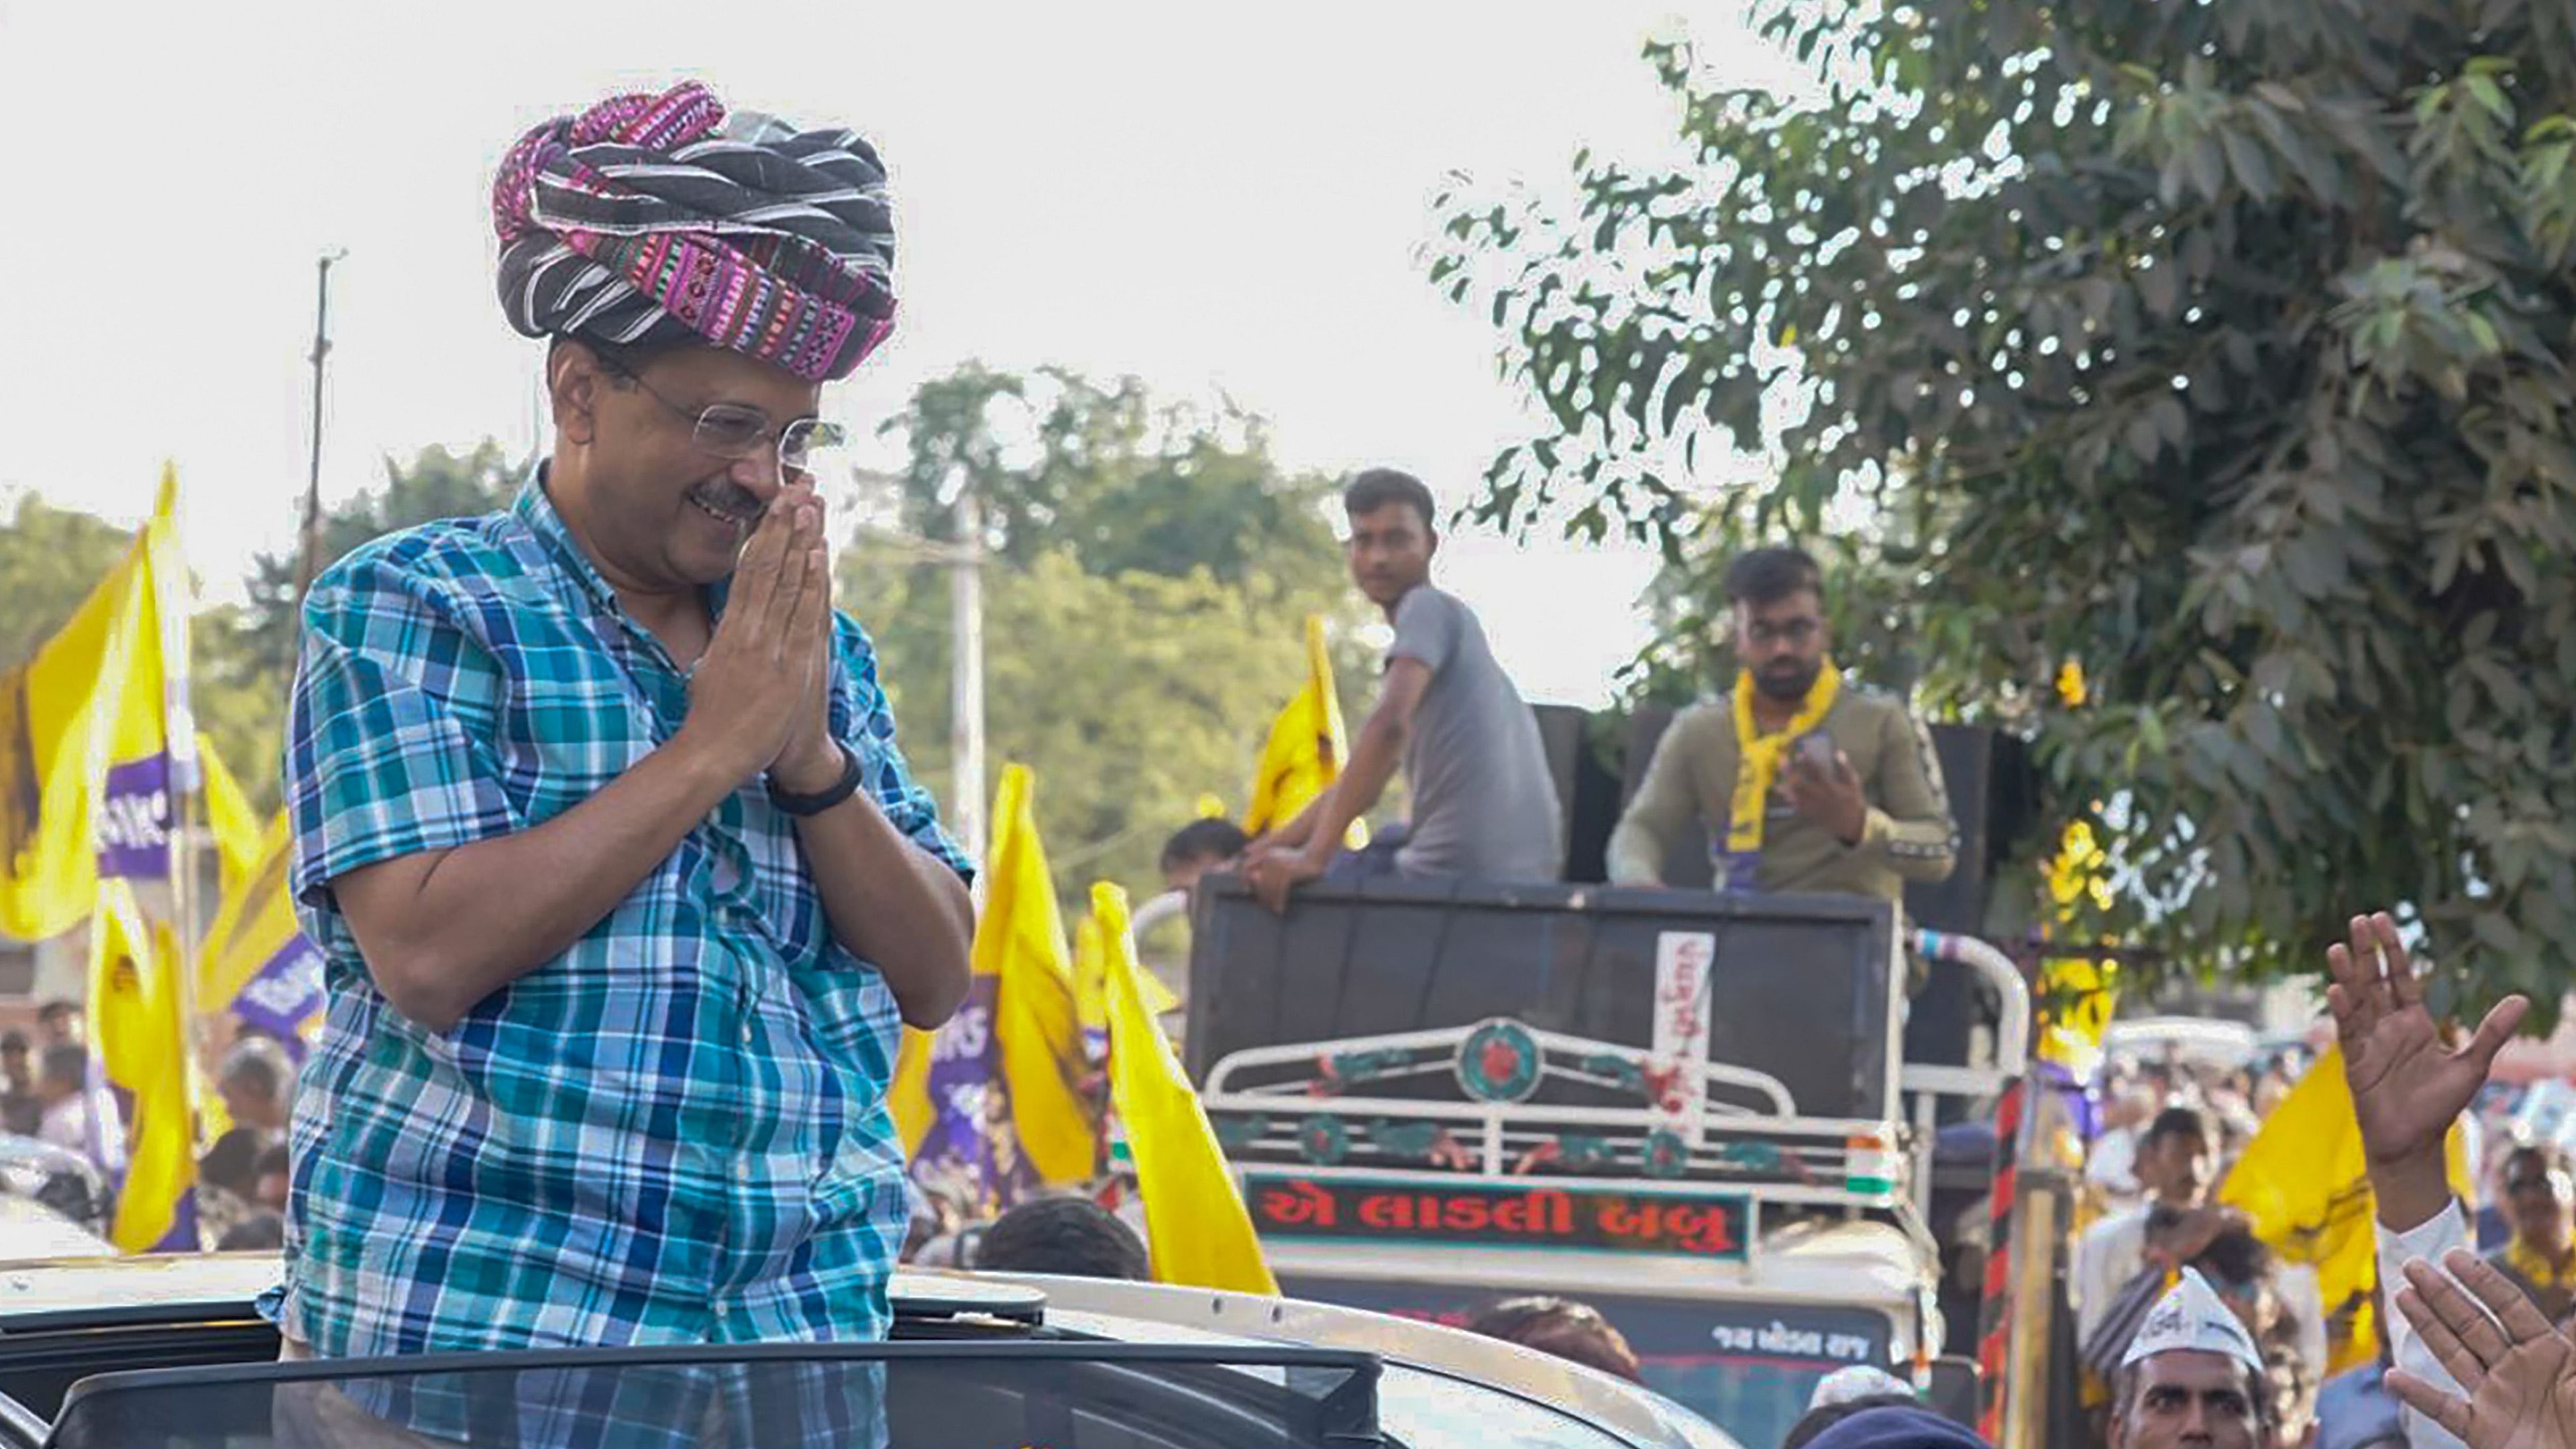 Kejriwal claimed voting for the Congress was futile as its legislators would later defect to the BJP. Credit: PTI Photo